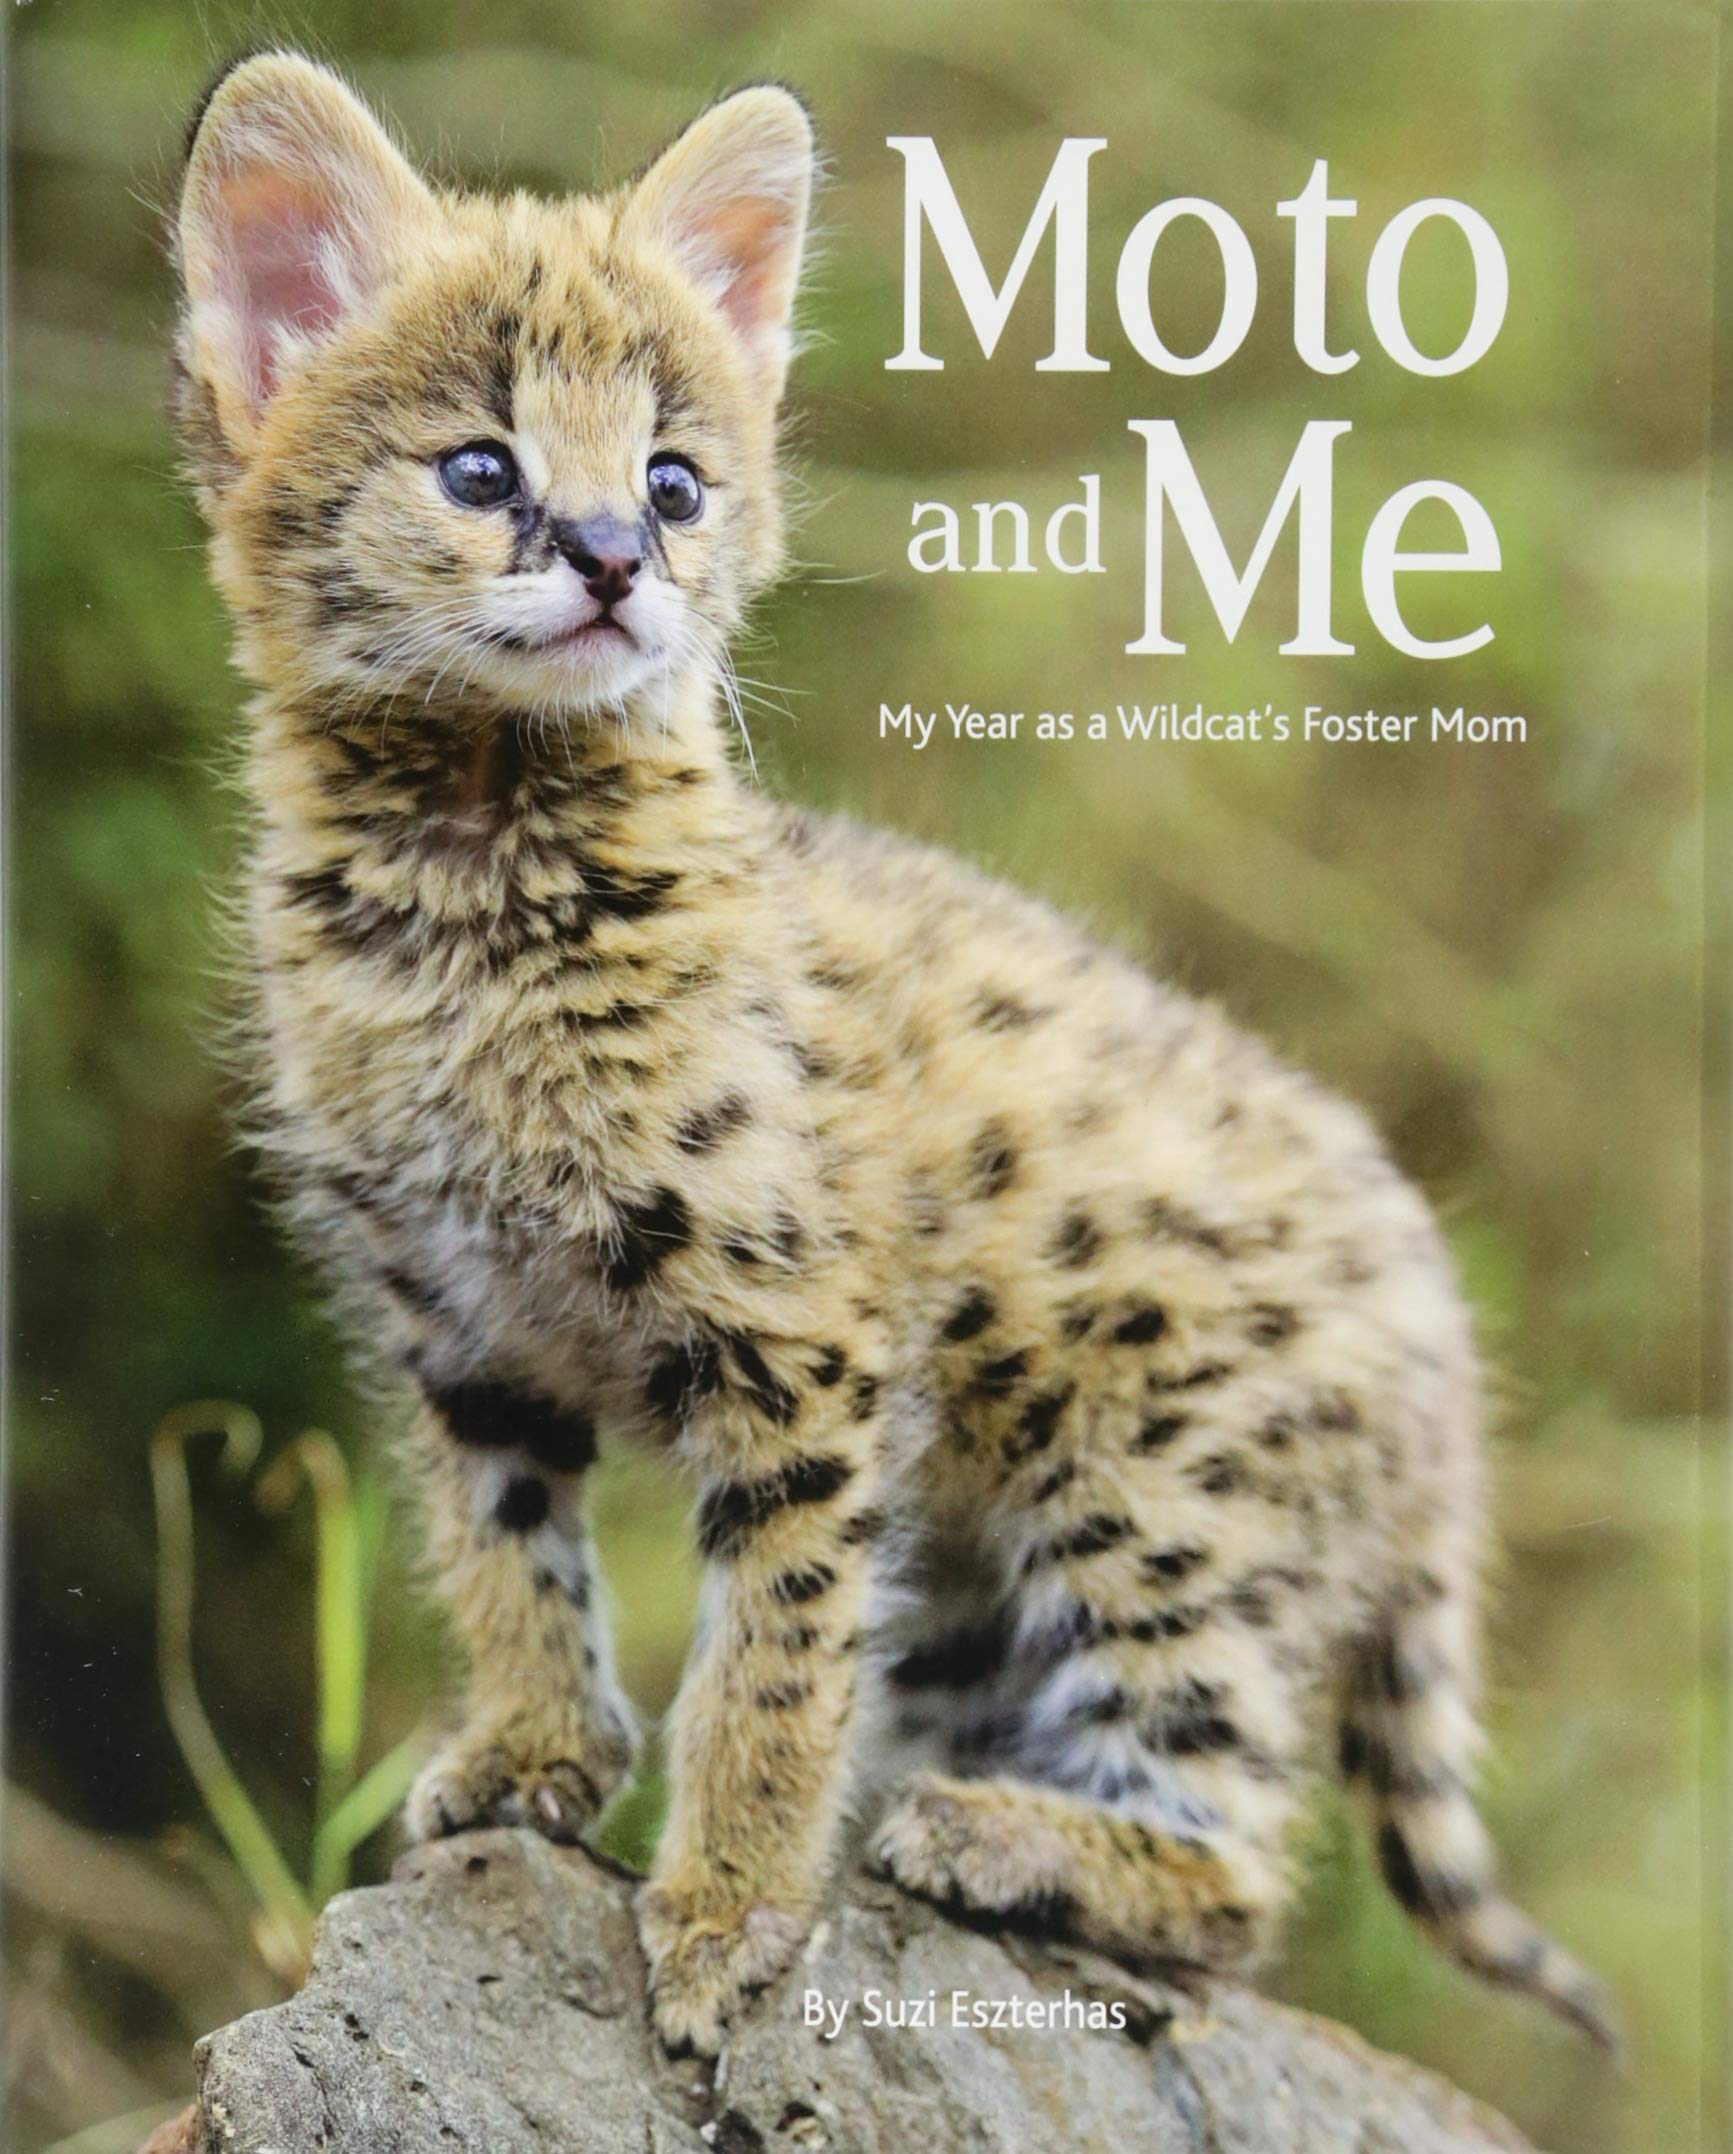 Moto and Me: My Year as a Wildcat’s Foster Mom